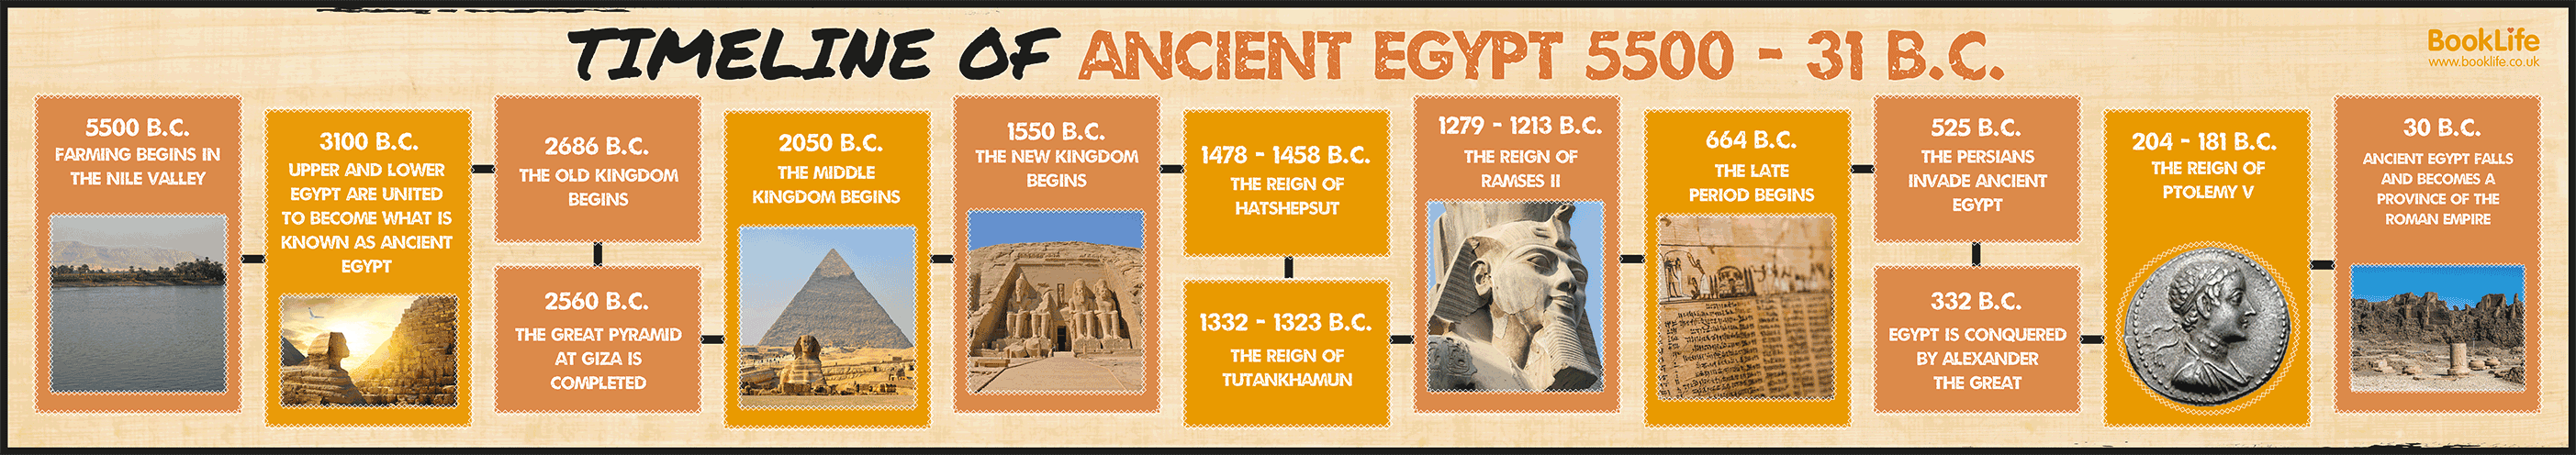 Timeline of Ancient Egypt by BookLife